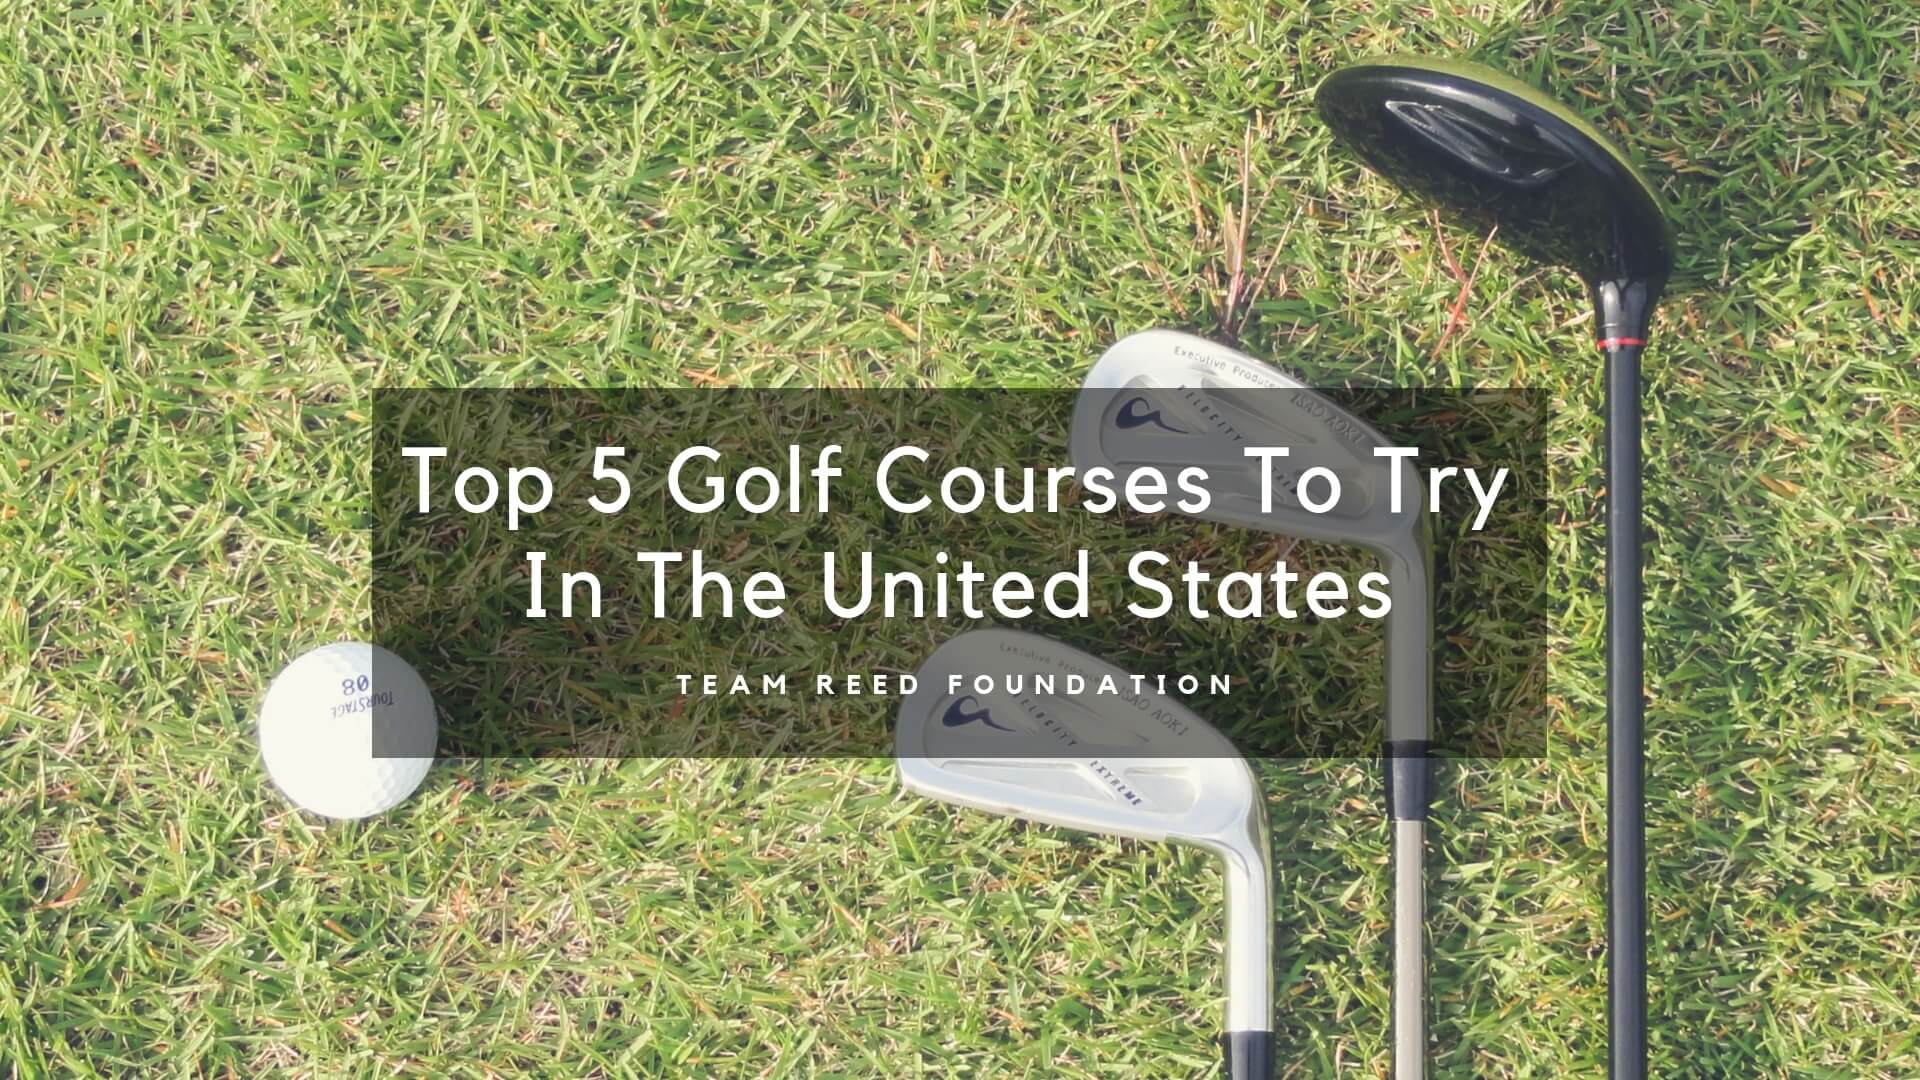 Top 5 Golf Clubs To Play In The United States